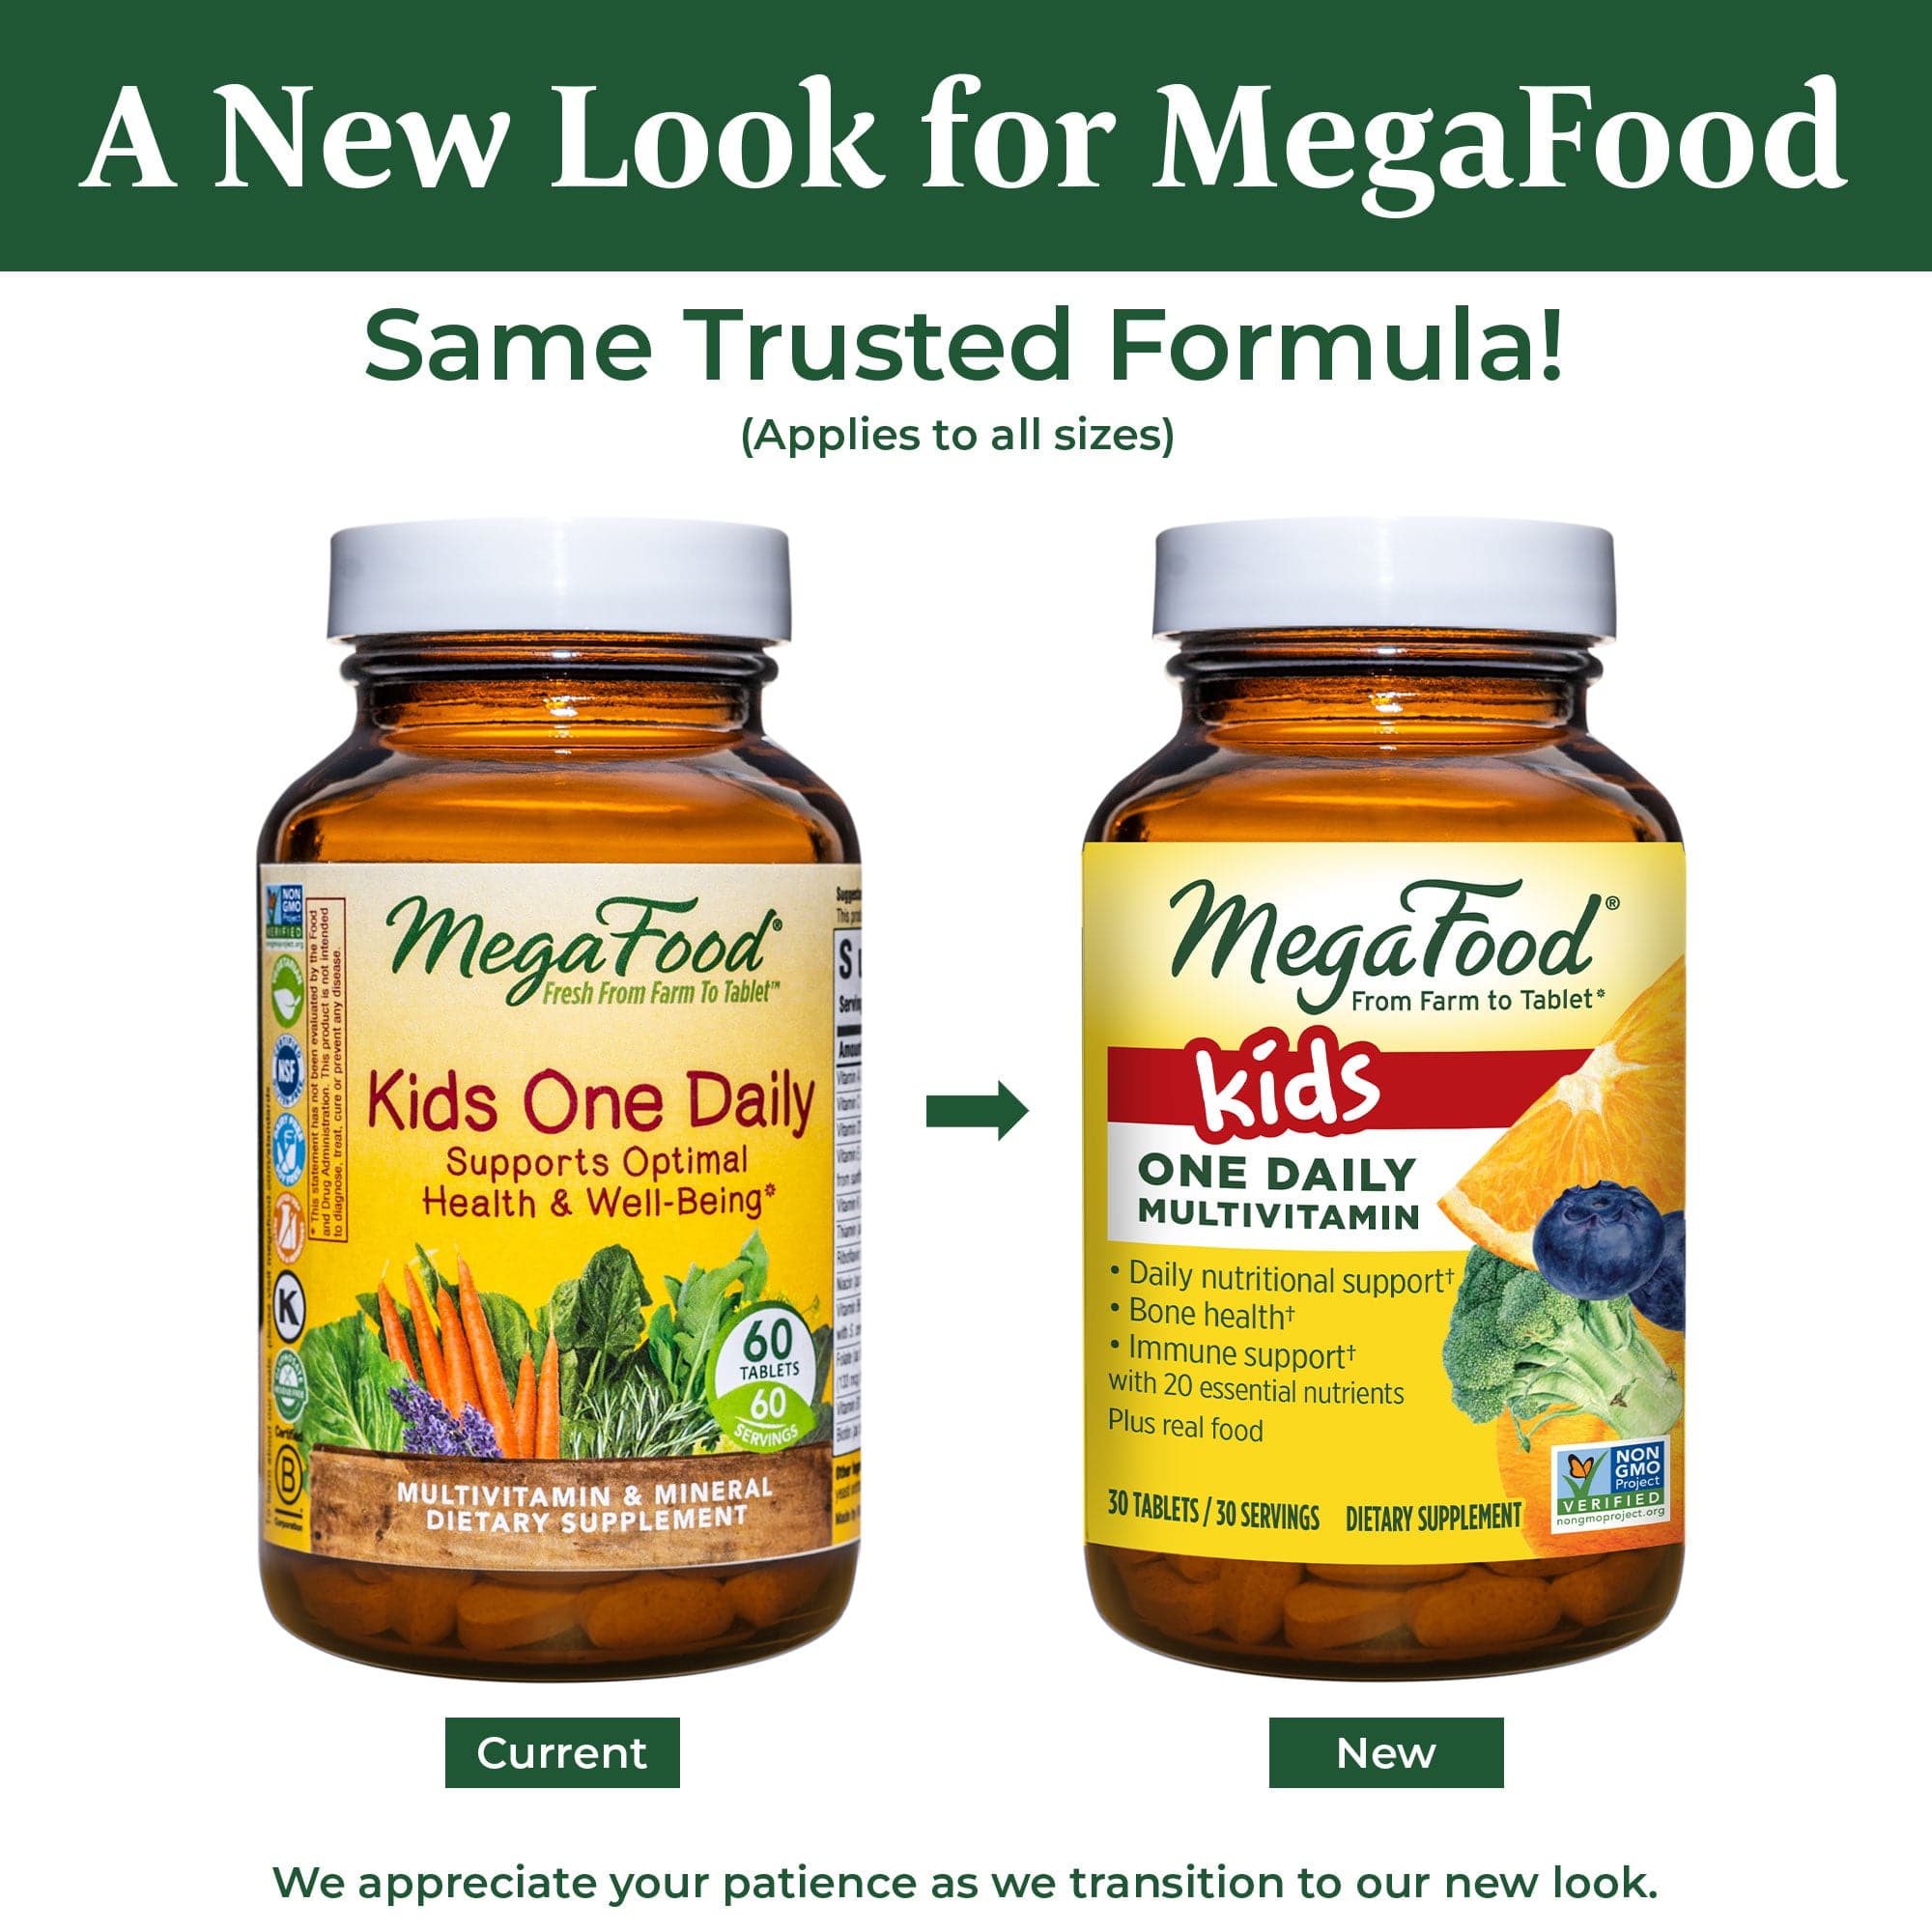 MegaFood Kids One Daily Multivitamin